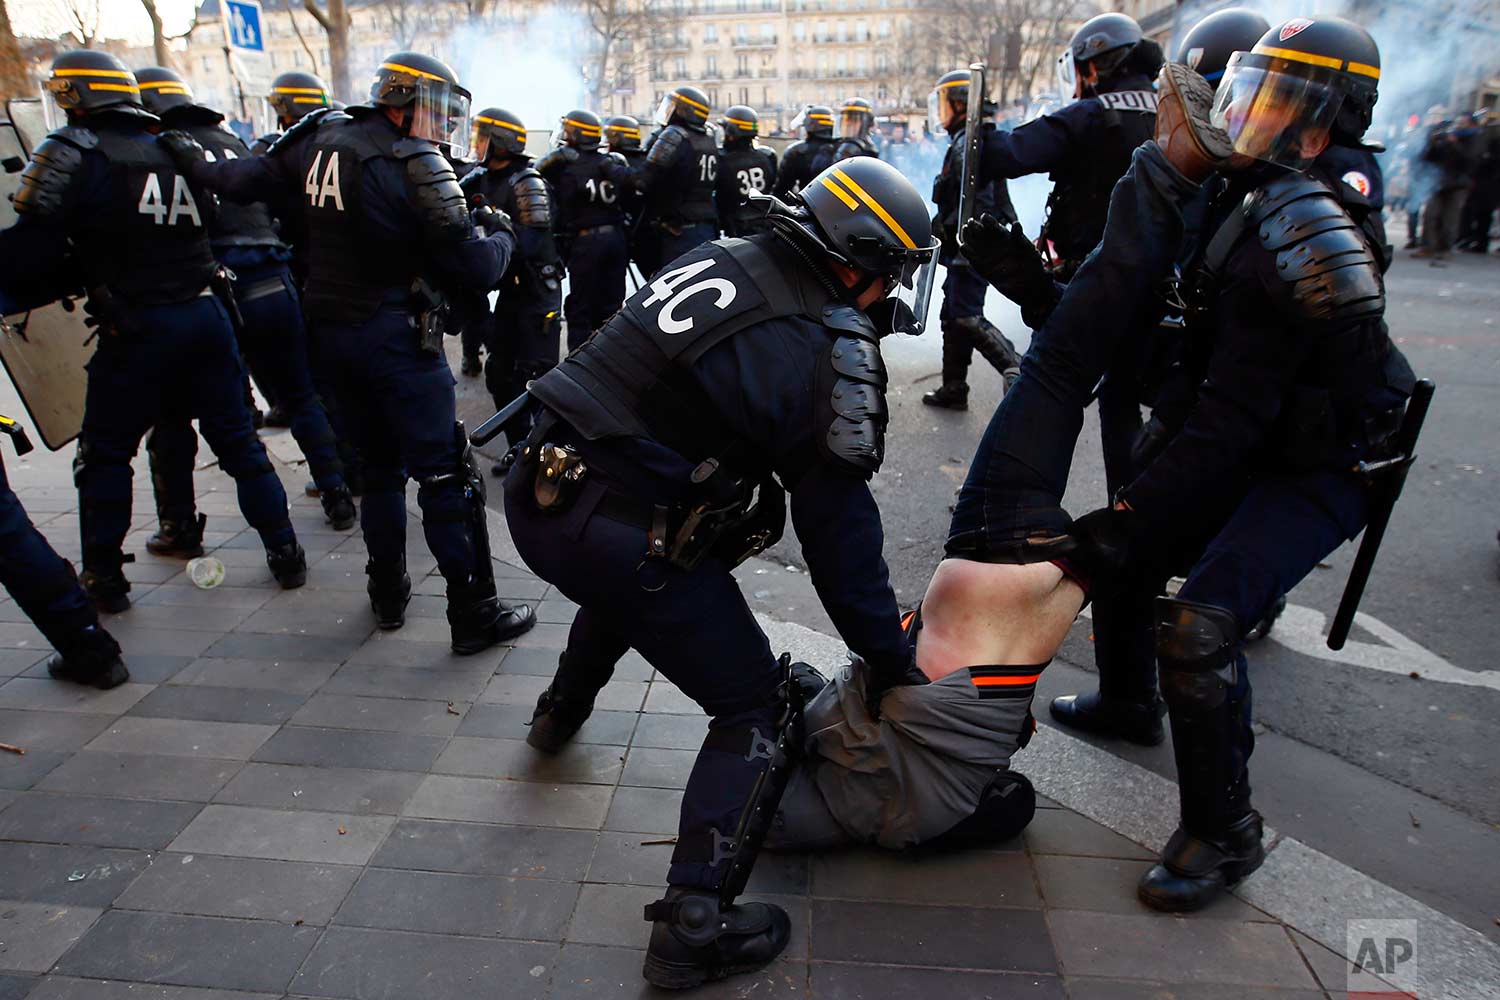  In this Saturday, Feb. 18, 2017 photo, riot Police officers apprehend a protester during clashes at a demonstration against alleged police abuse, in Paris. Anti-racism groups and other activists are gathered in Paris in support of victims of police 